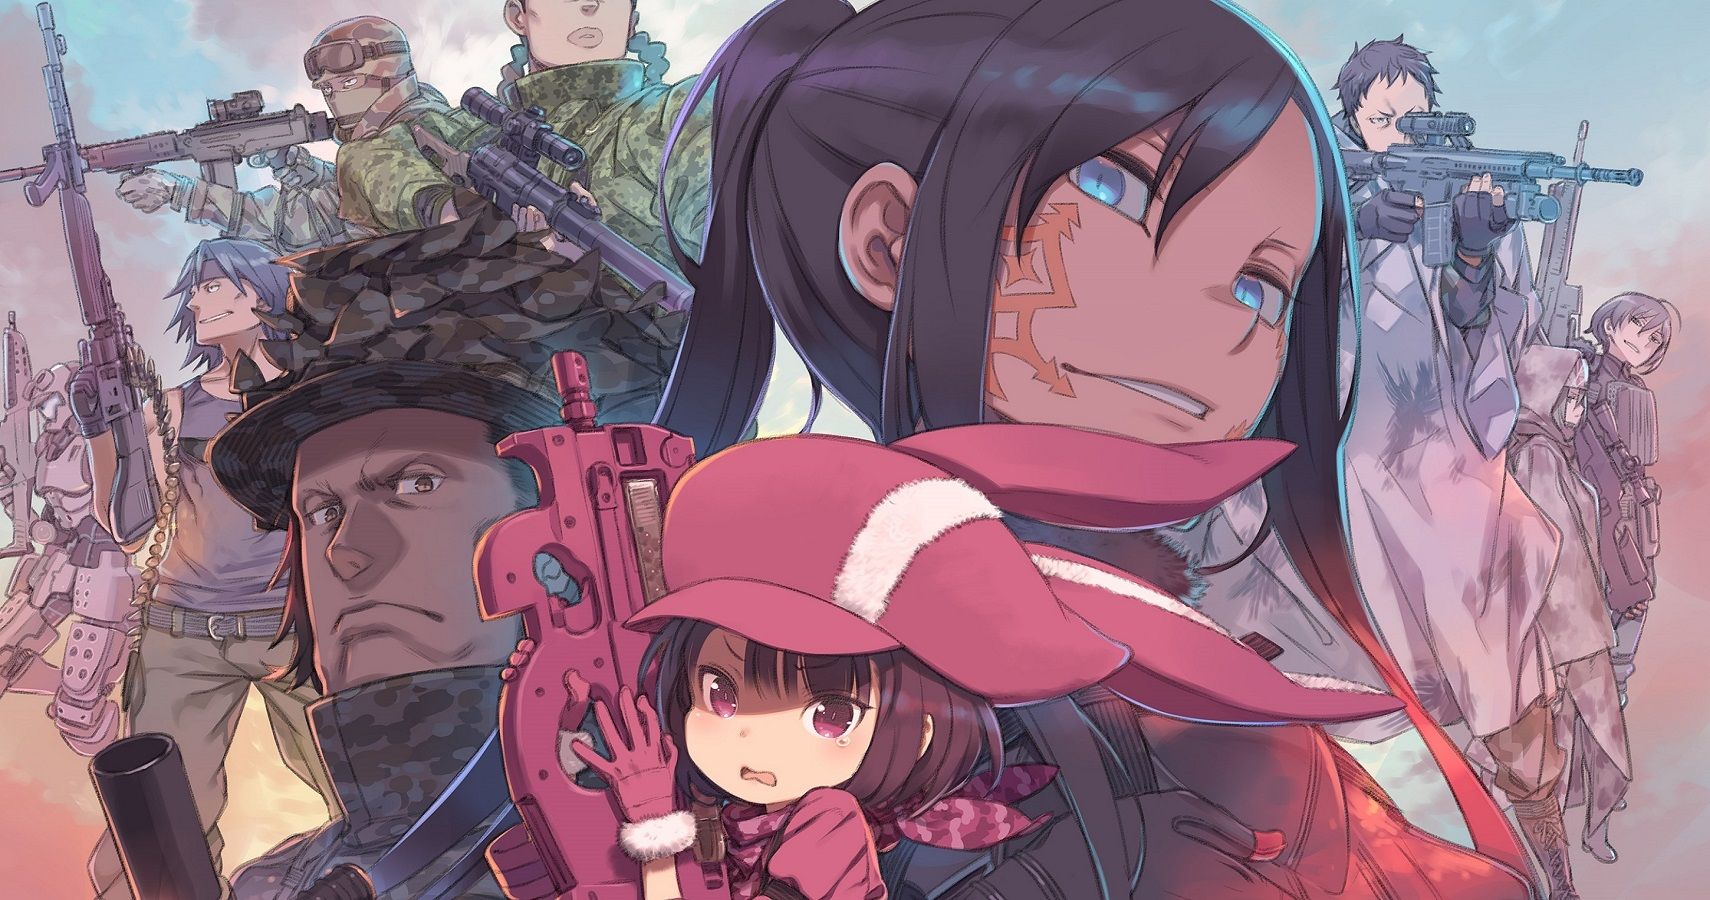 Sword Art Online's Gun Gale Online Is A Meh Anime, But A Cool (Fake) Game